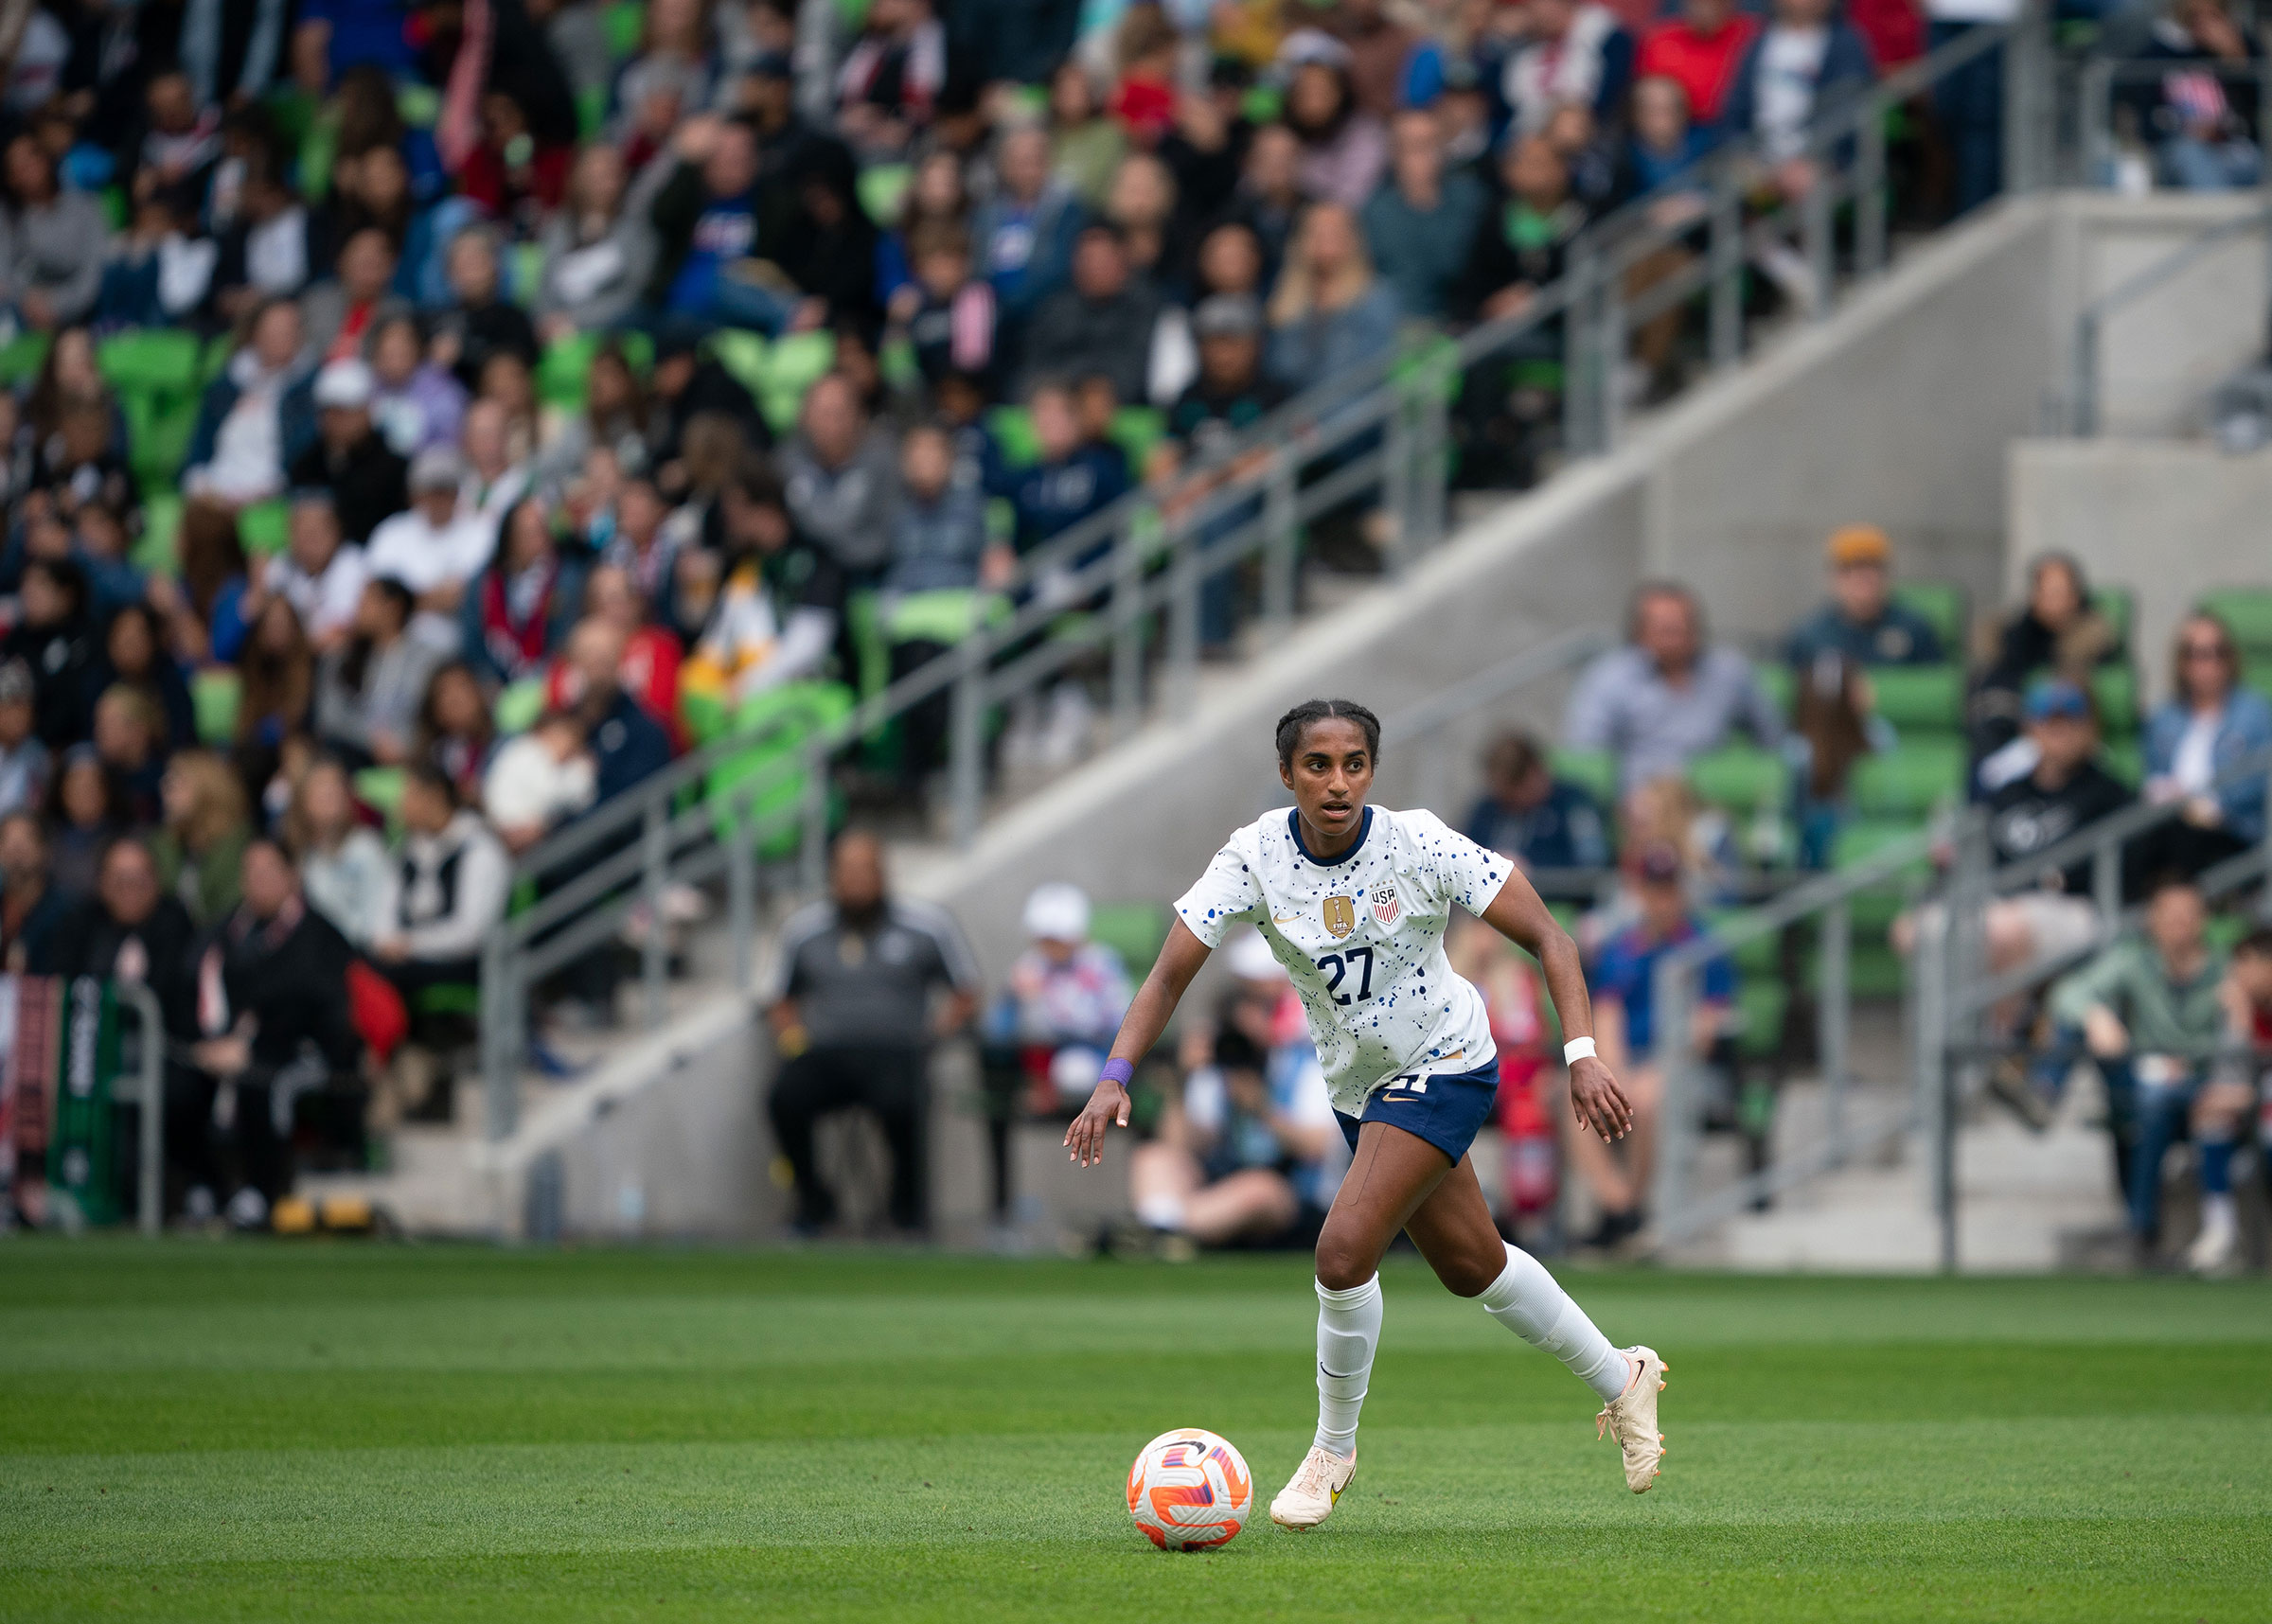 Naomi Girma #27 of the United States dribbles the ball during an international friendly game between Ireland and the USWNT at Q2 Stadium in Austin on April 8, 2023.